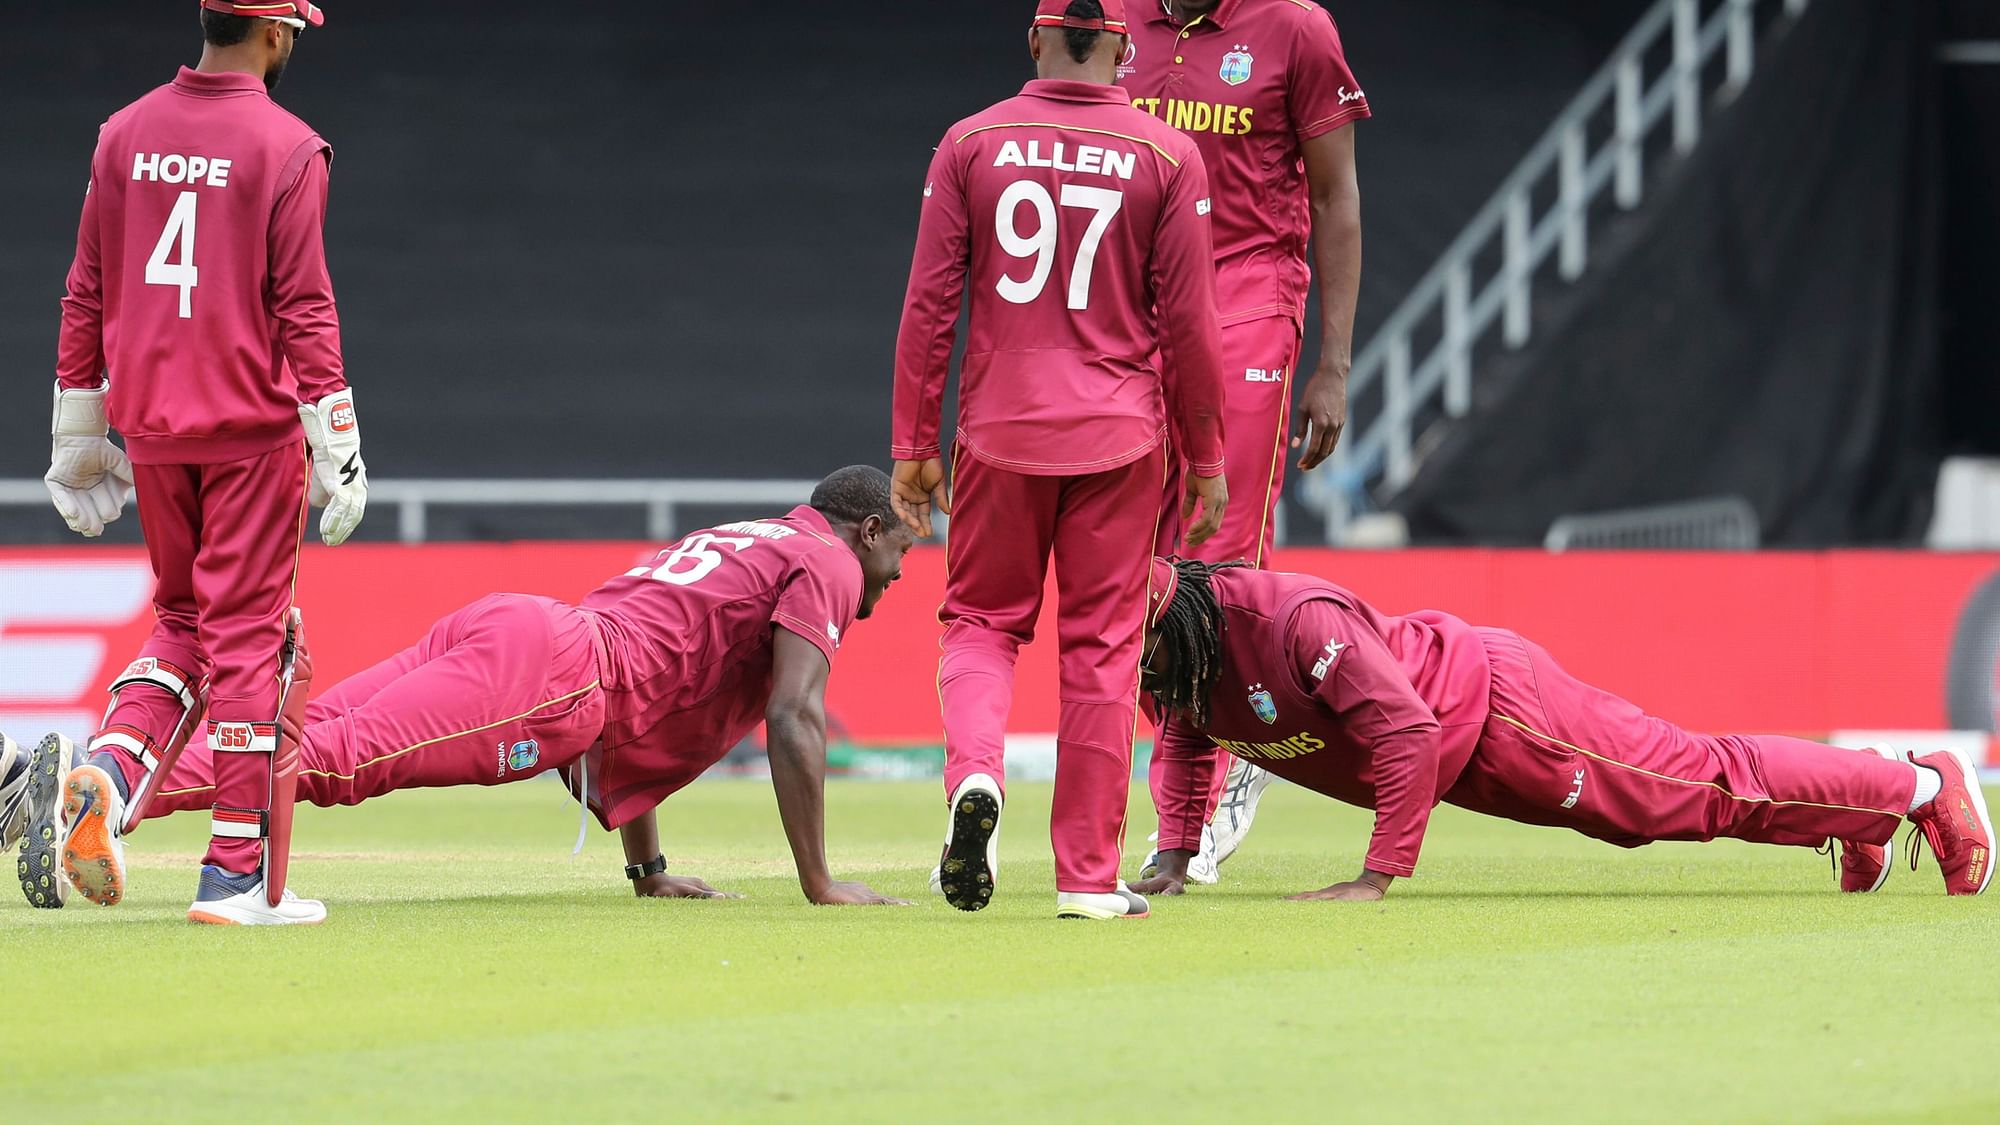 West Indies players celebrate the dismissal of Afghanistan’s Rahmat Shah during the Cricket World Cup match between Afghanistan and West Indies at Headingley in Leeds, England, Thursday, July 4, 2019.&nbsp;